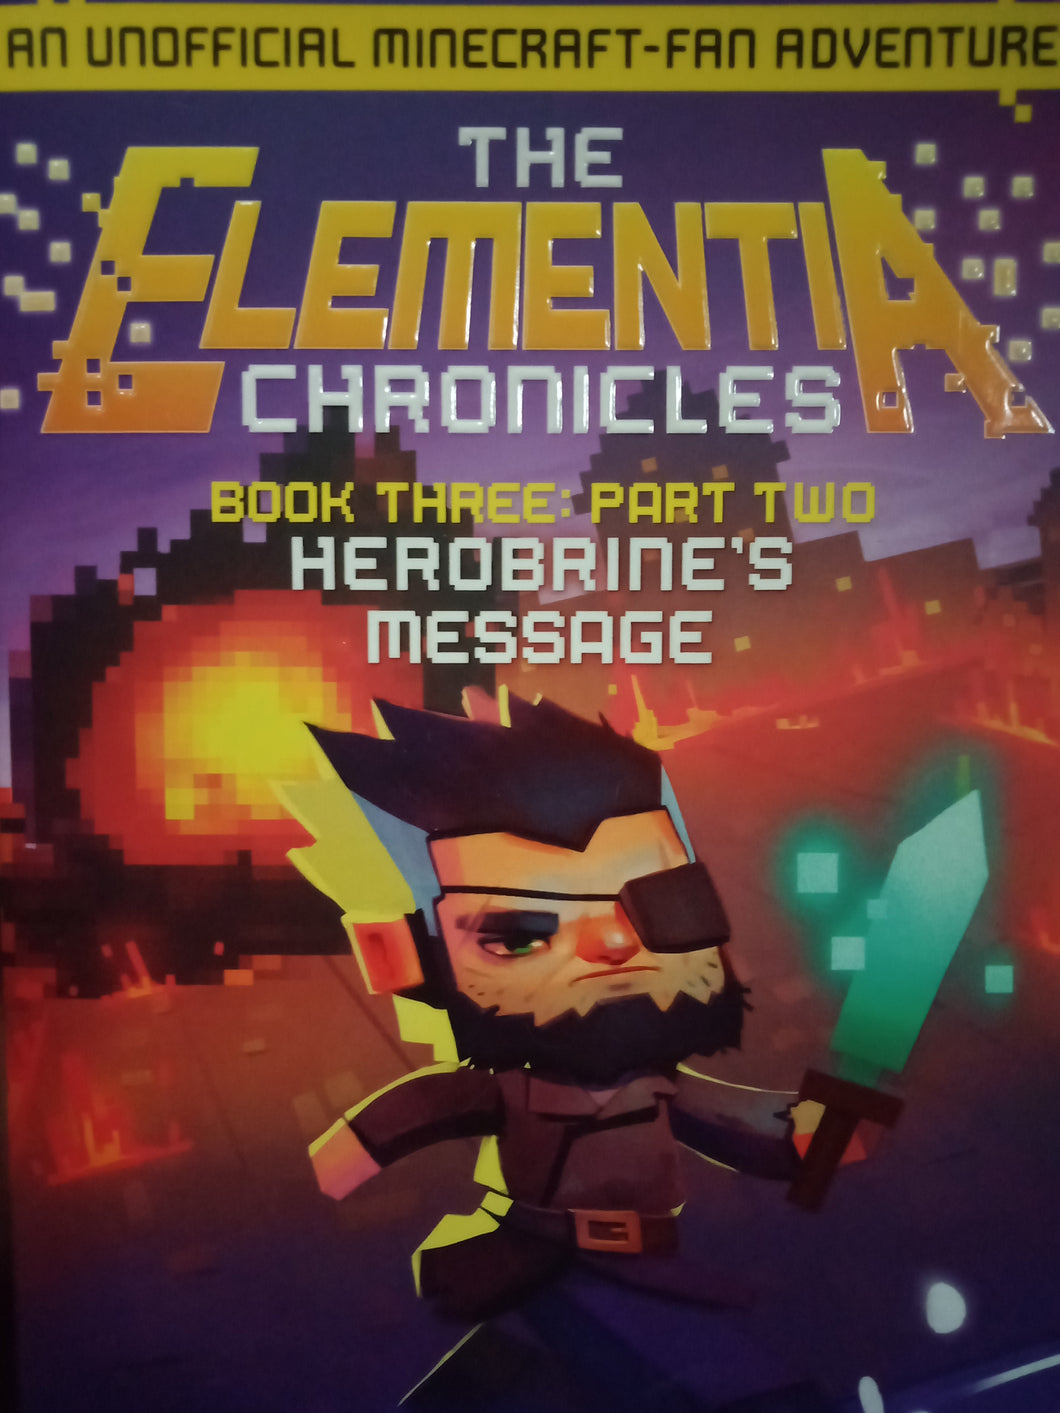 The Elementia Chronicles Book Three: Part Two Herobrine'ss Message